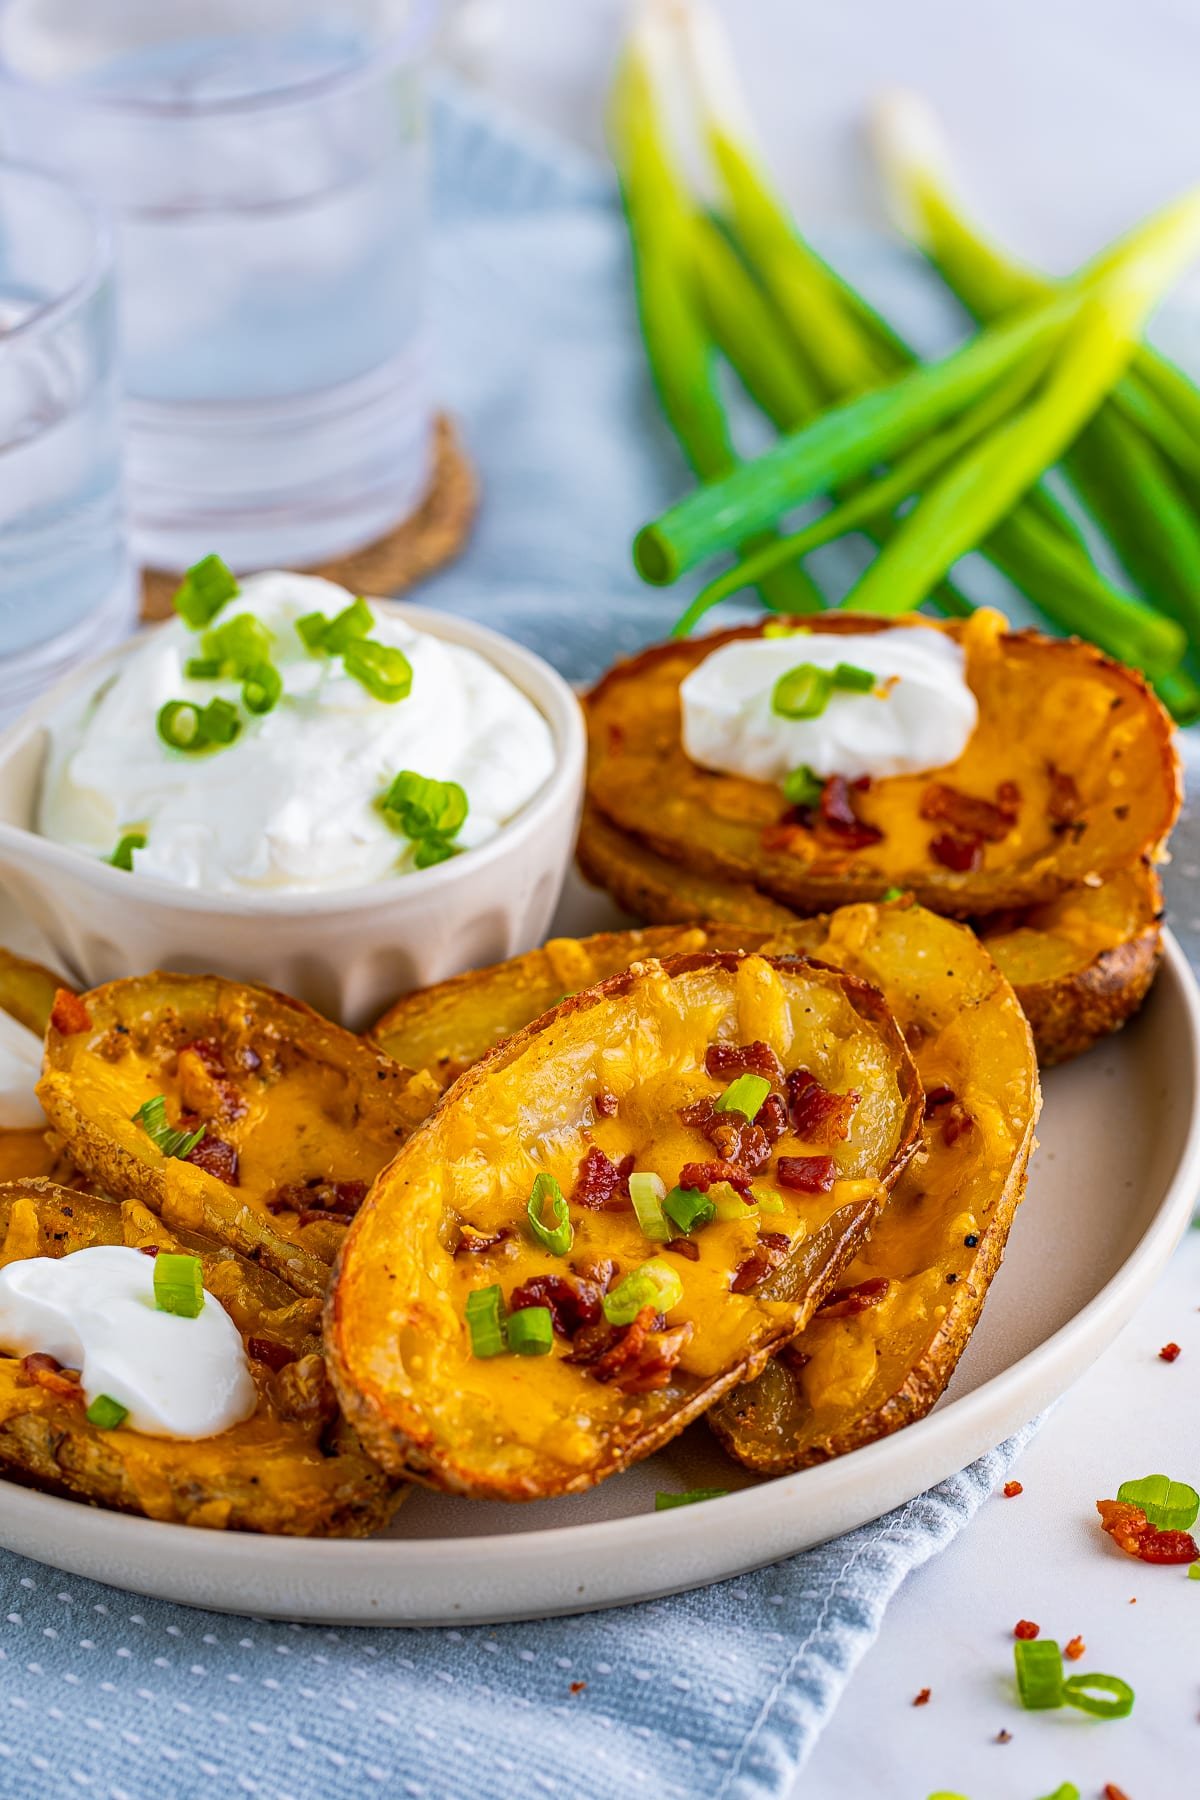 Finished Loaded Potato Skins on white plate with toppings and sour cream for dipping on side.